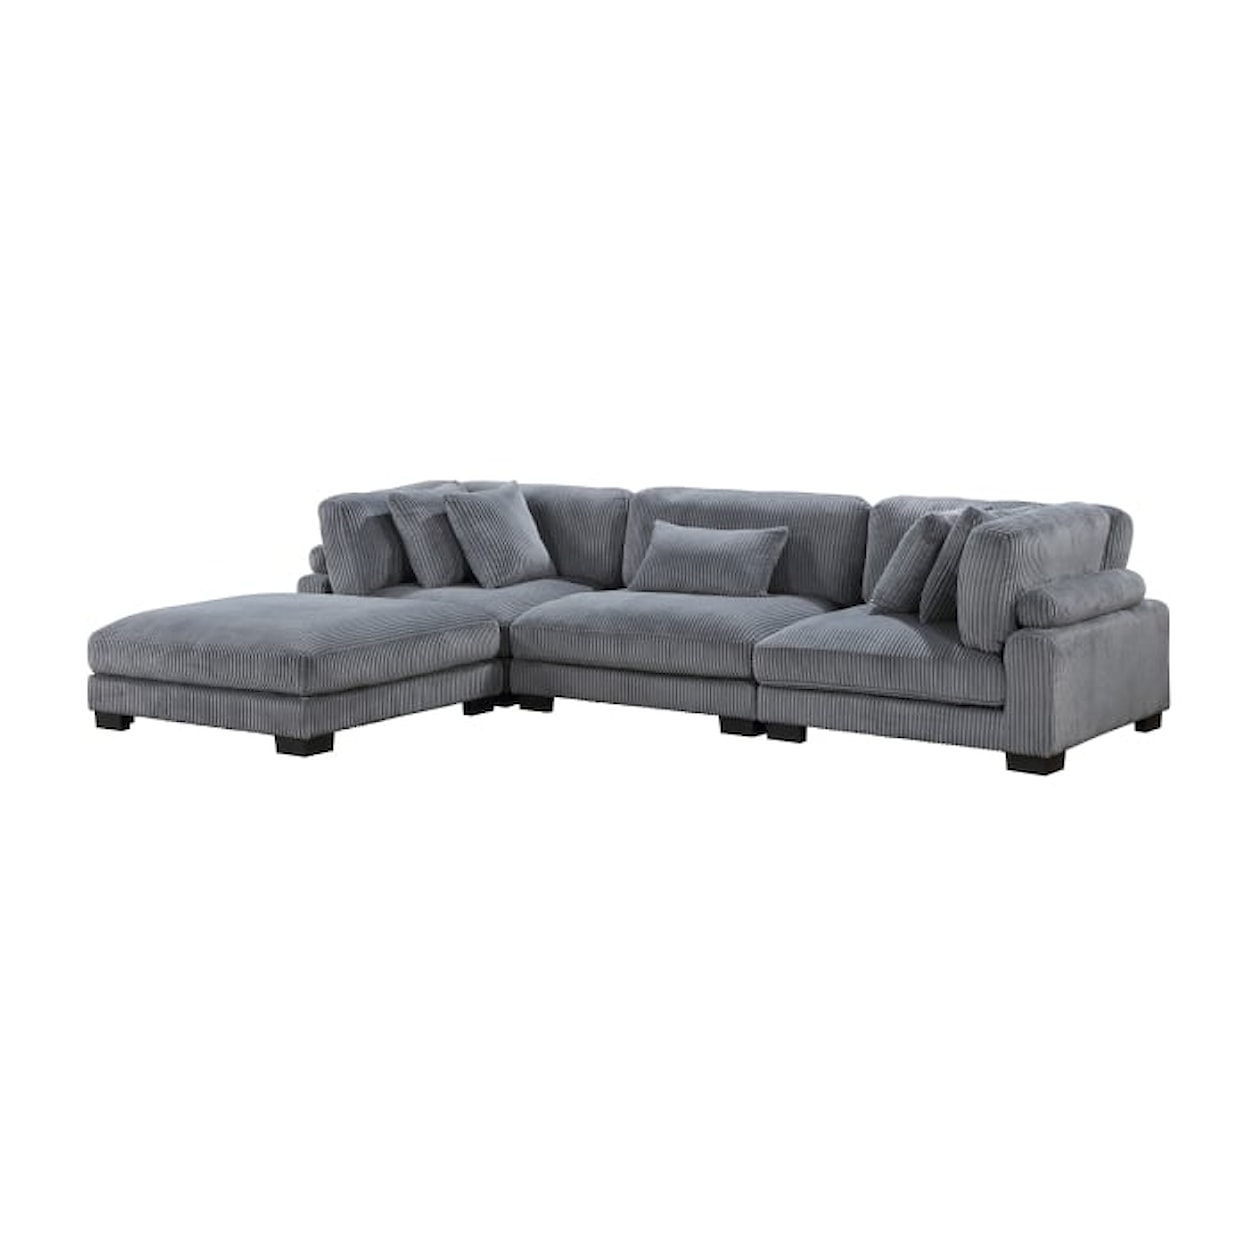 Homelegance Traverse 4-Piece Modular Sectional with Ottoman